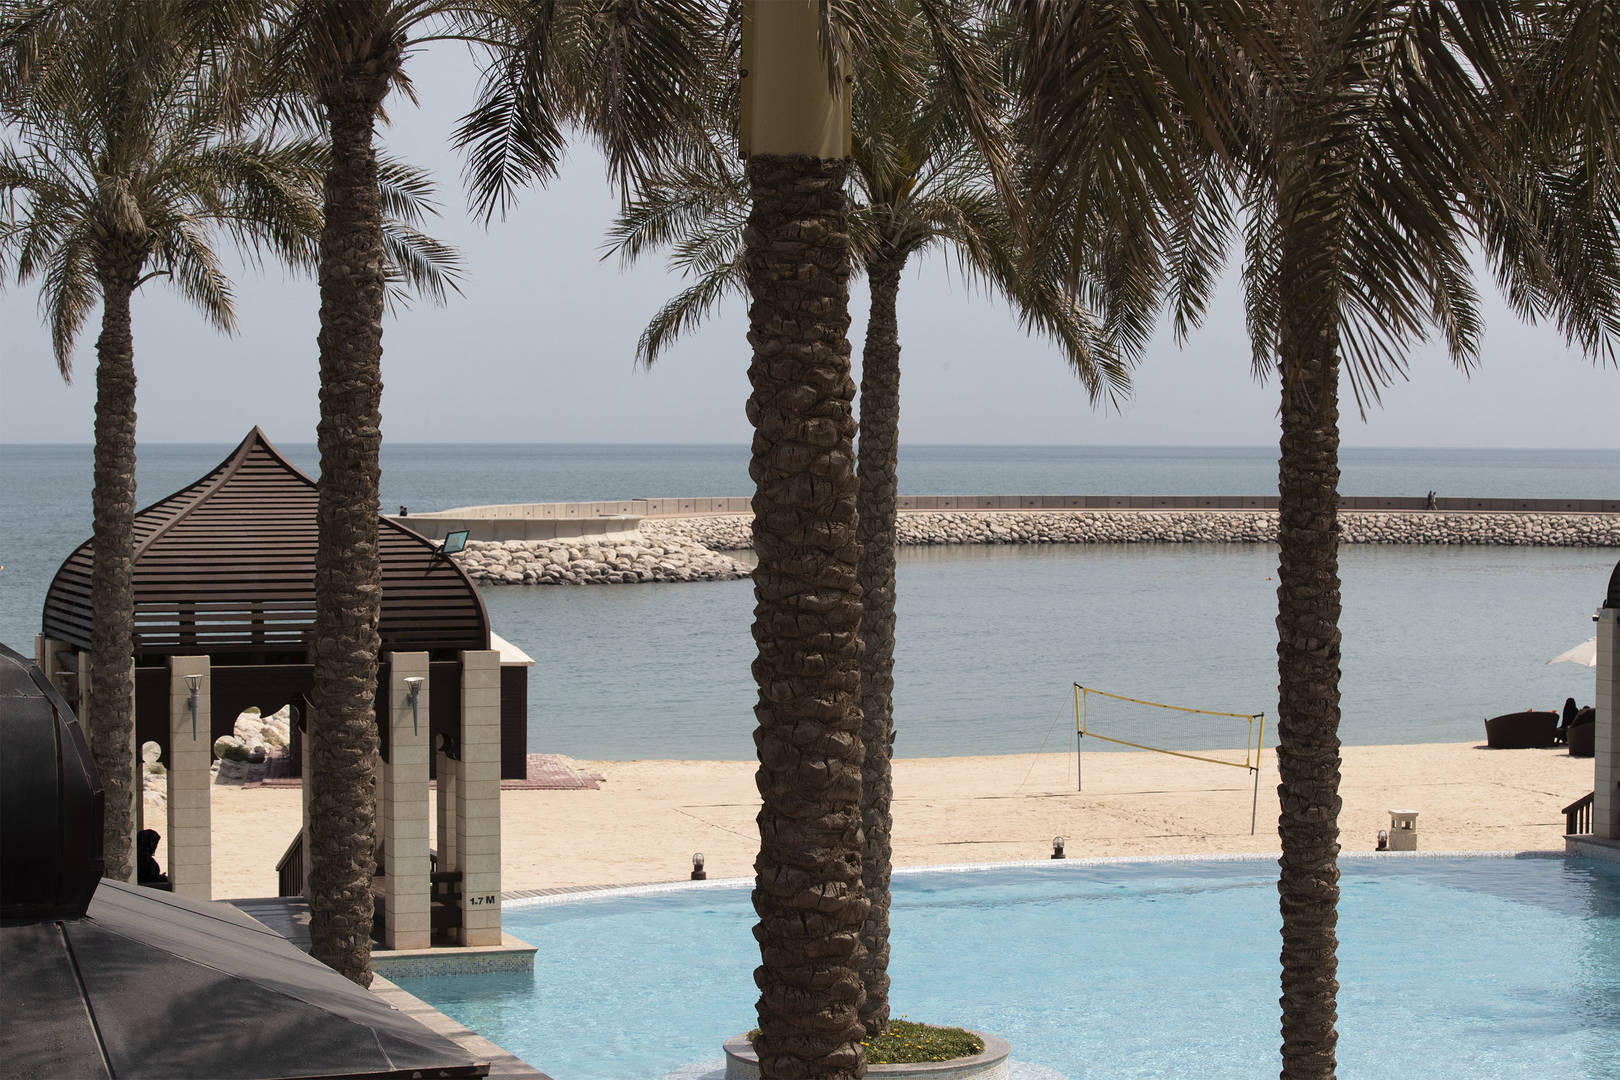 Pool and Jetty aerial view of Jumeirah Messilah Beach Hotel Spa